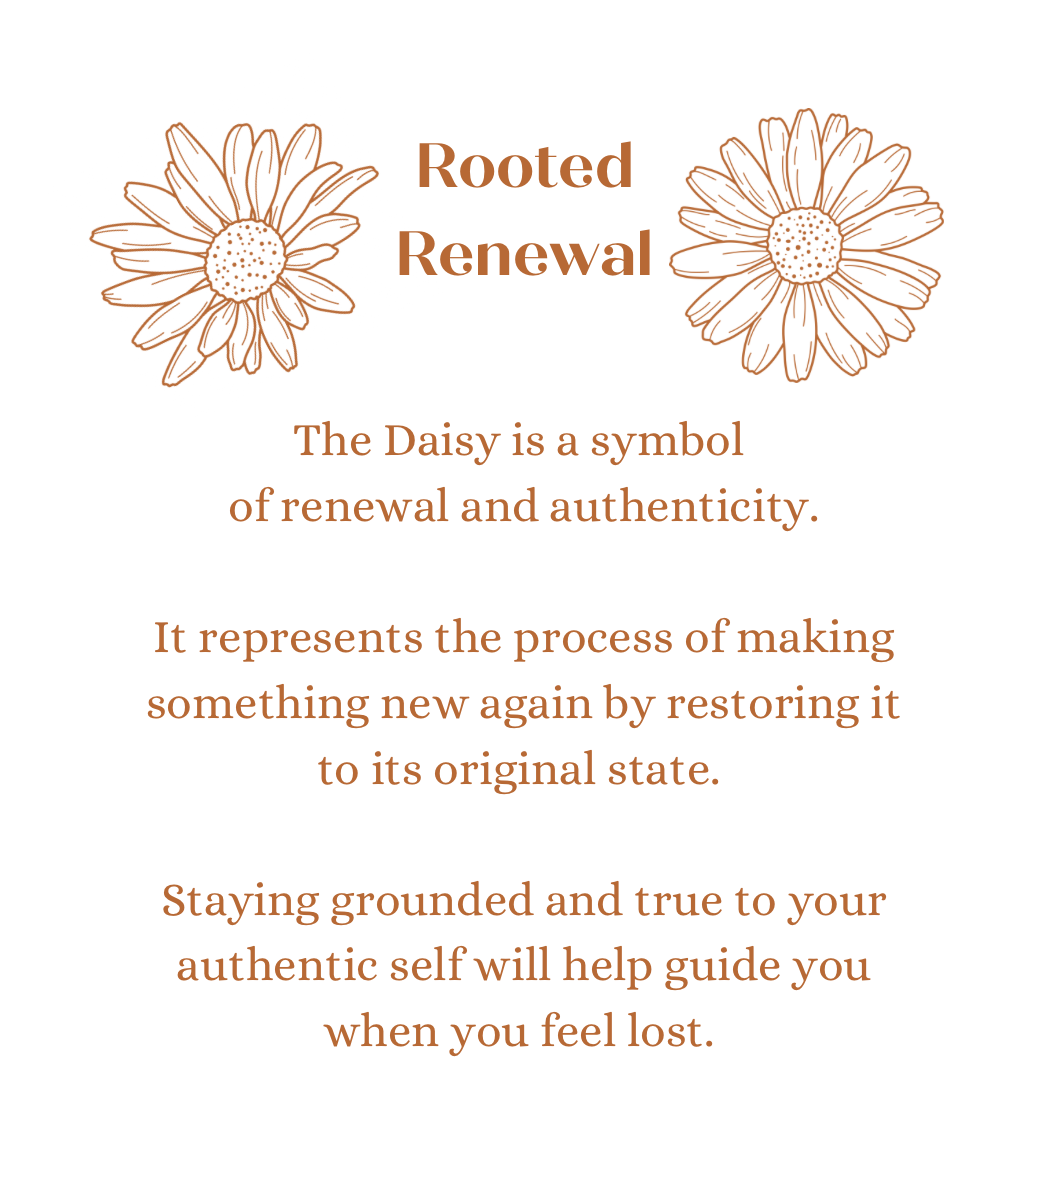 Rooted Renewal in Theia